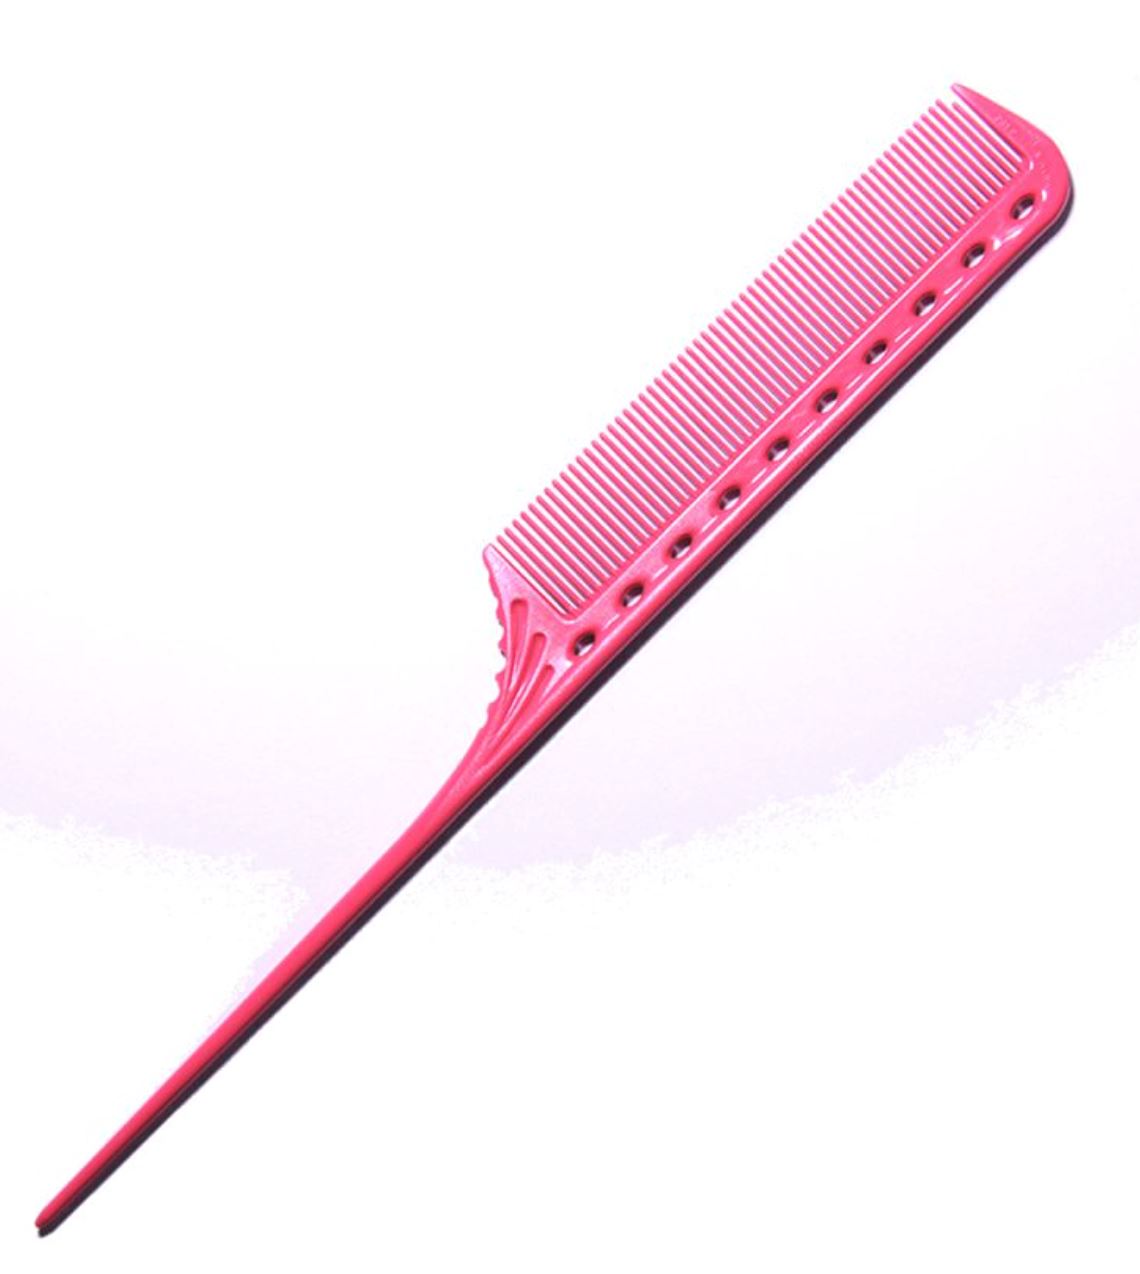 YS Park 101 Tail Comb (216 mm) Hair Comb YS Park Pink 